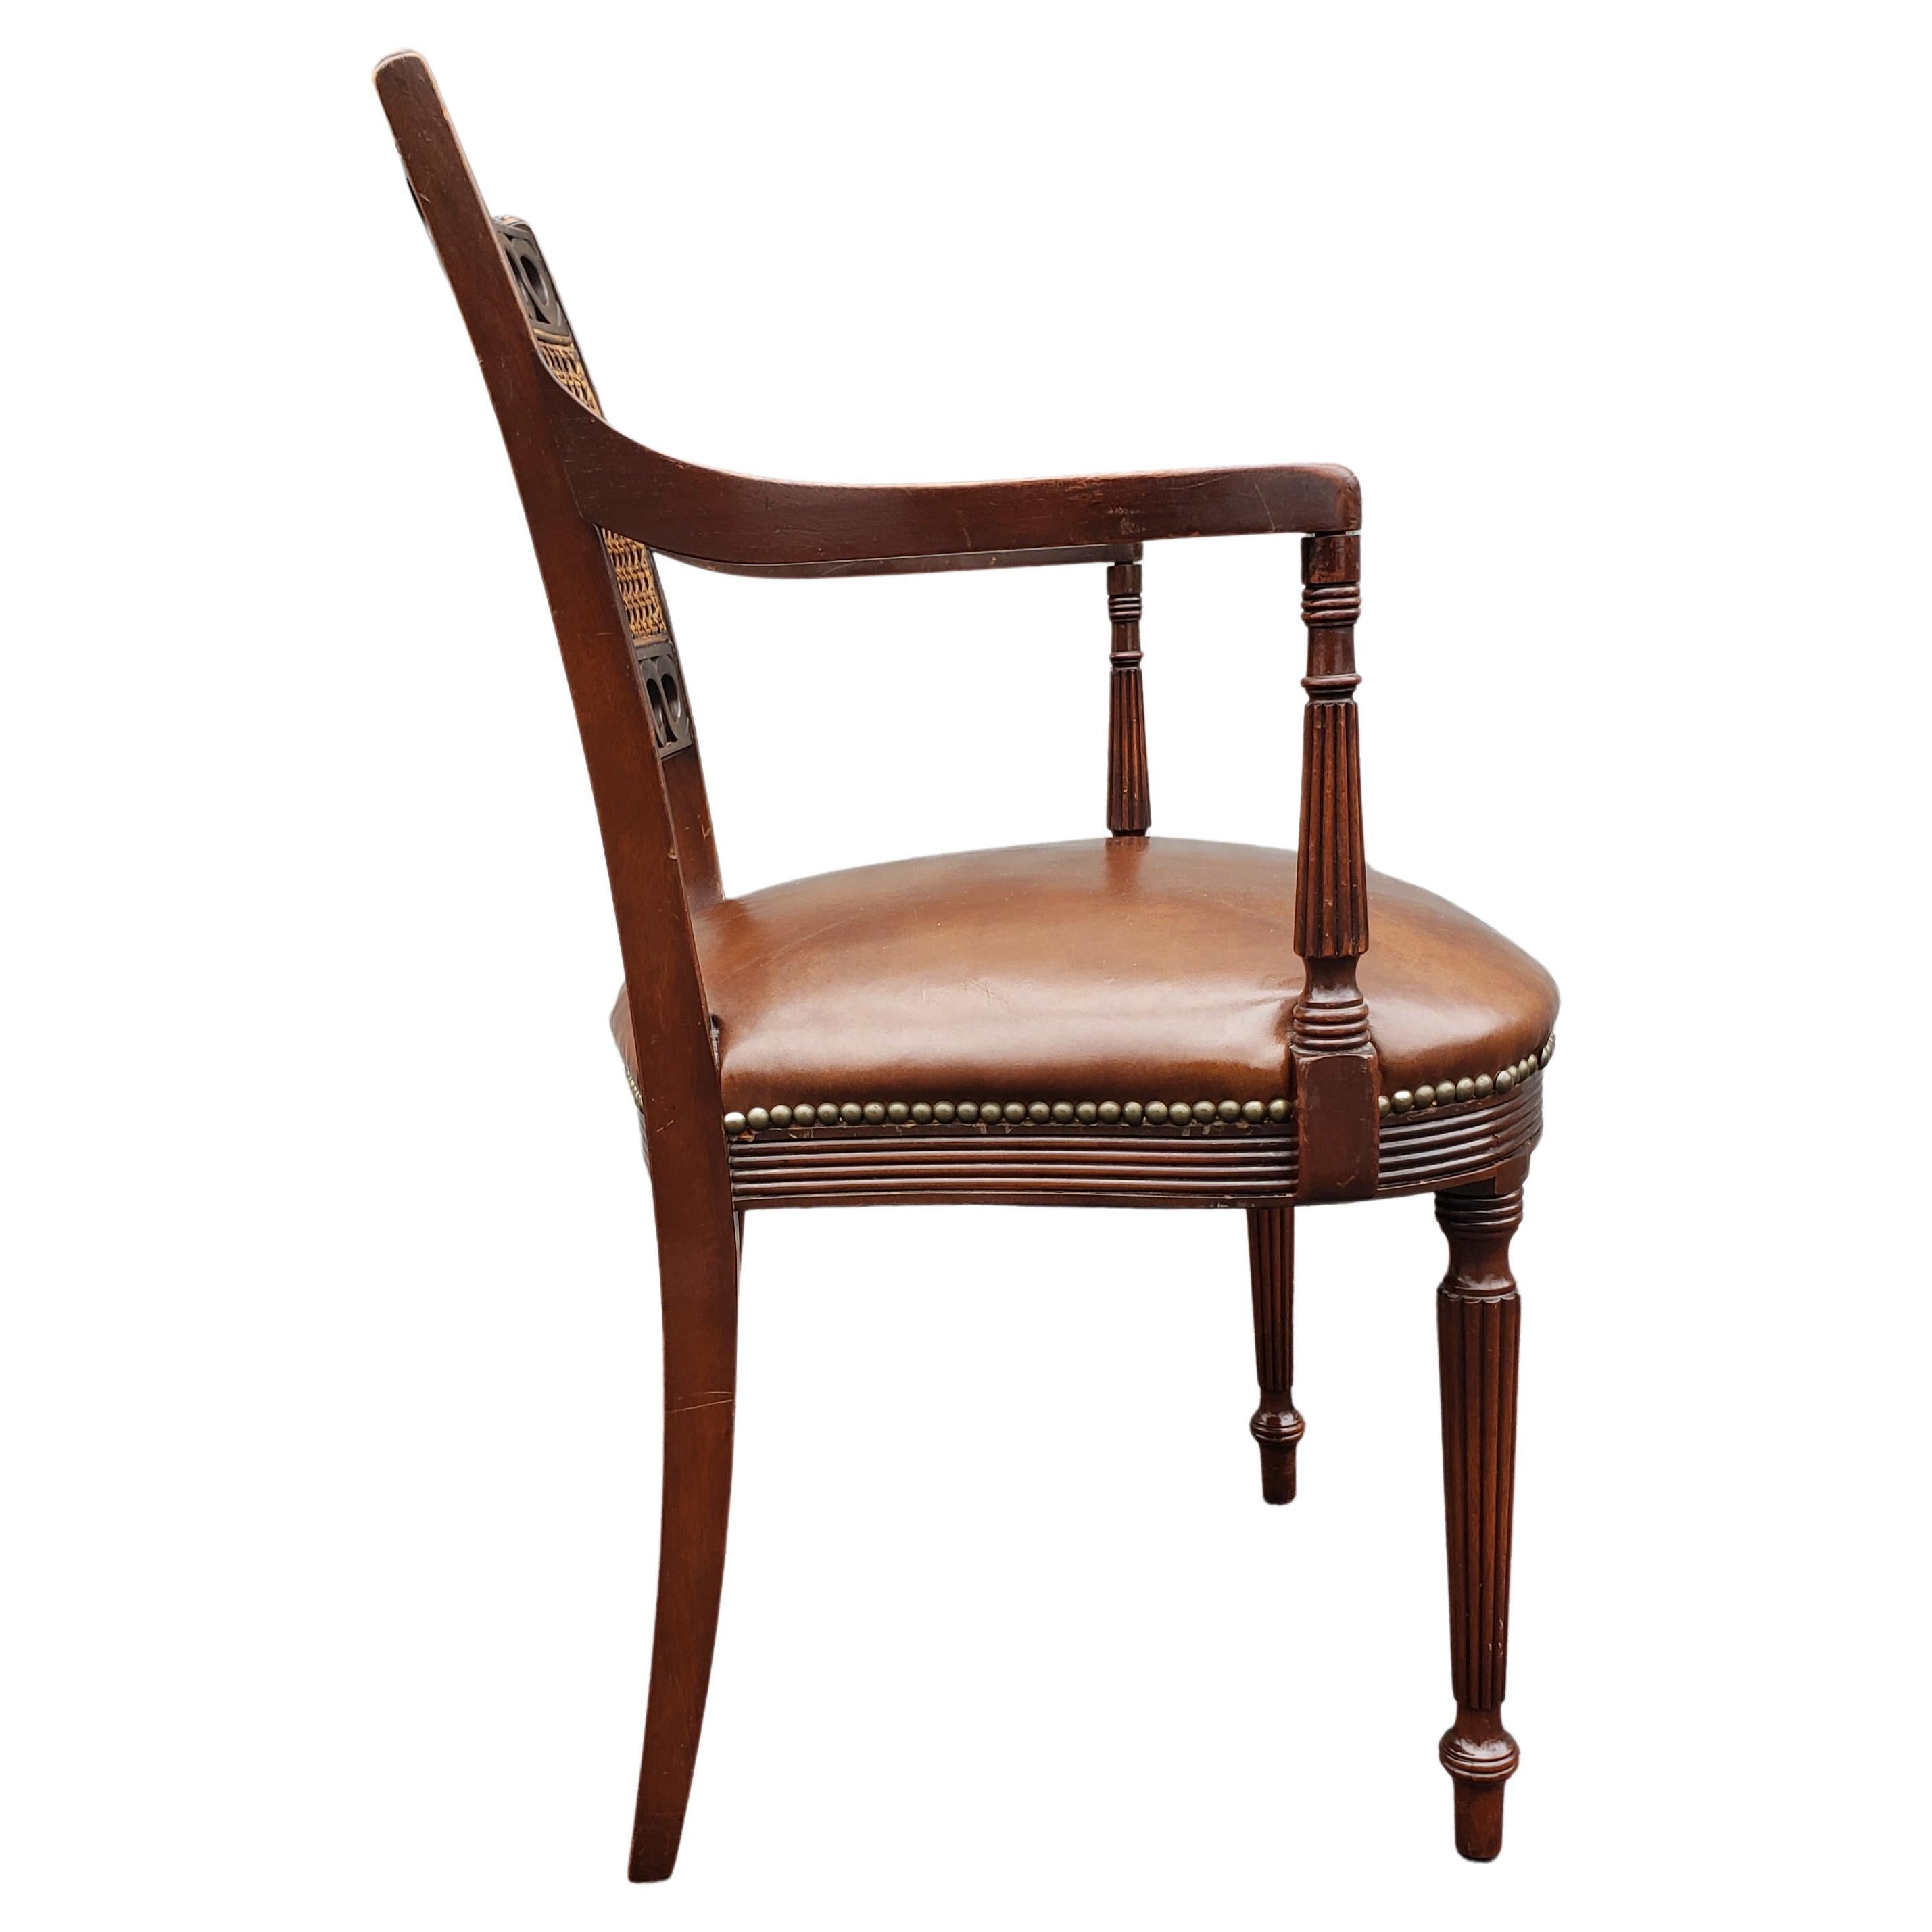 Caning Midcentury Regency Mahogany Leather Seat with Cane Back Armchair